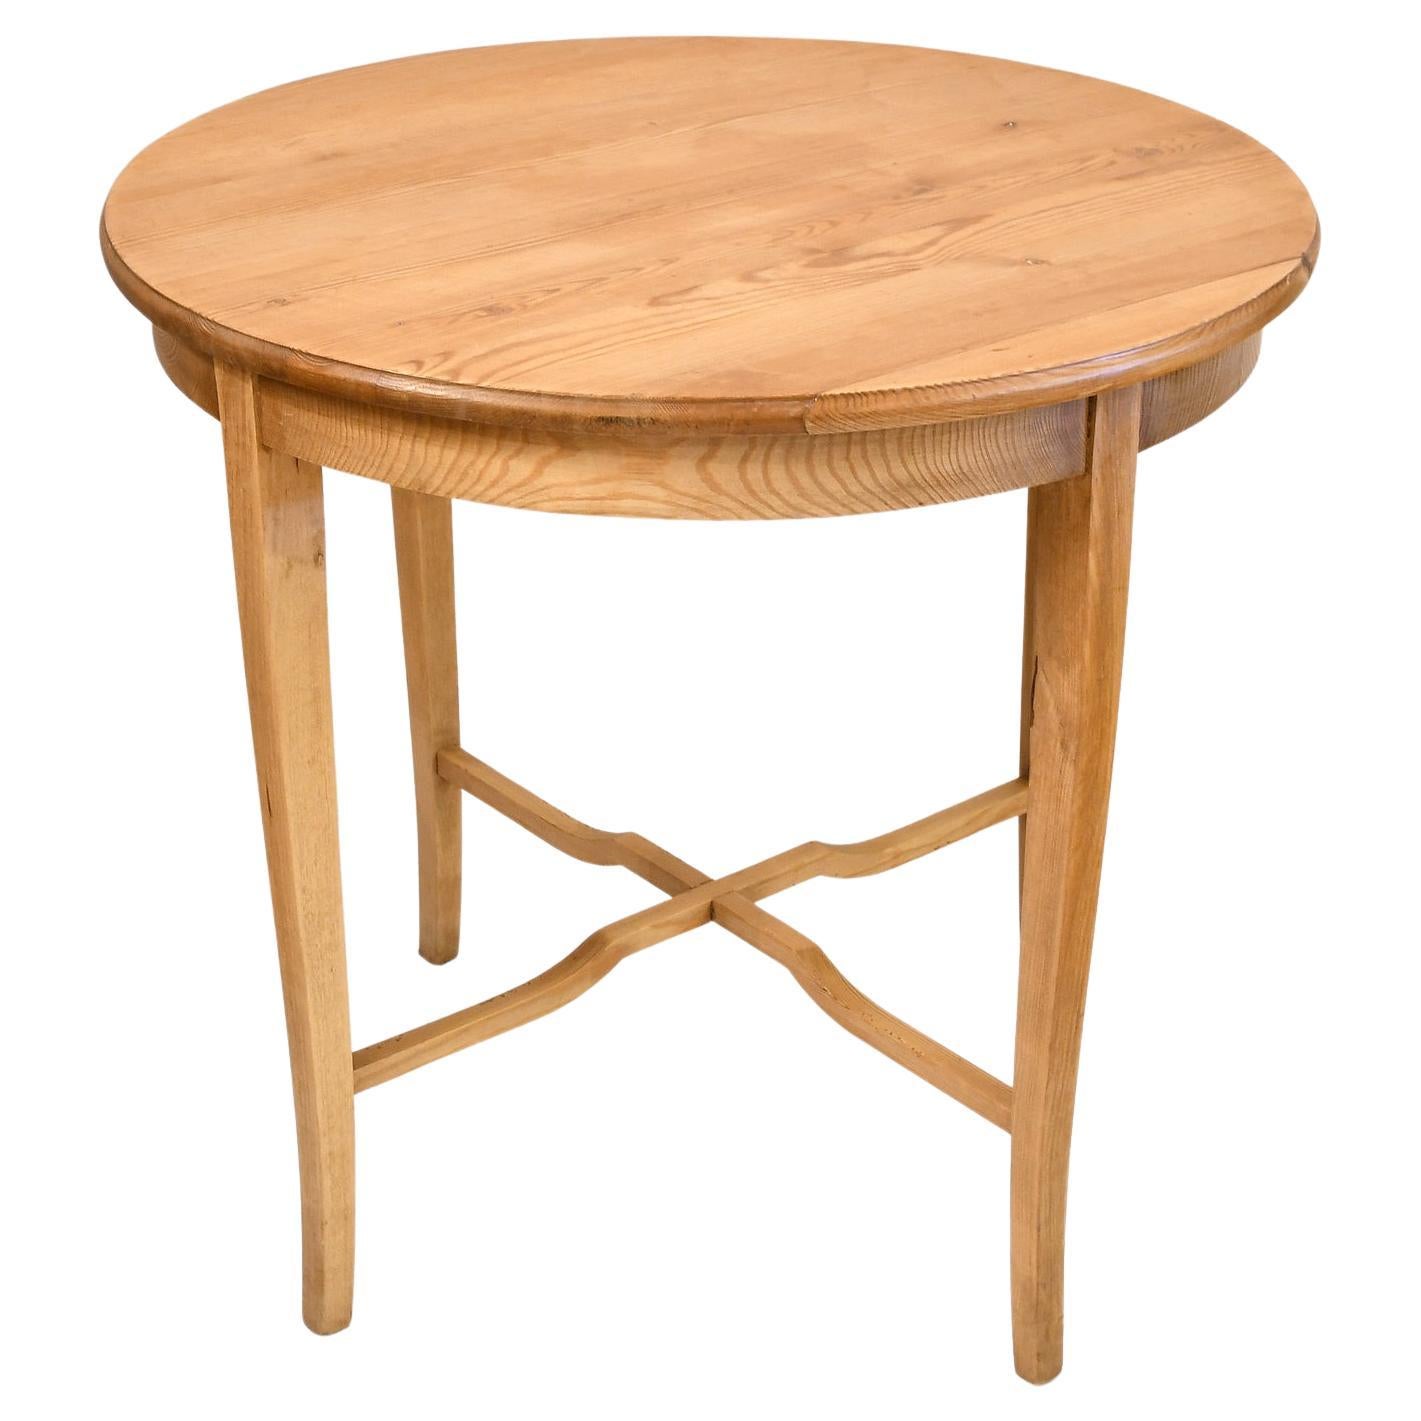 Danish Small Antique Scandinavian Round End/ Side Table in Pine, Denmark, circa 1920